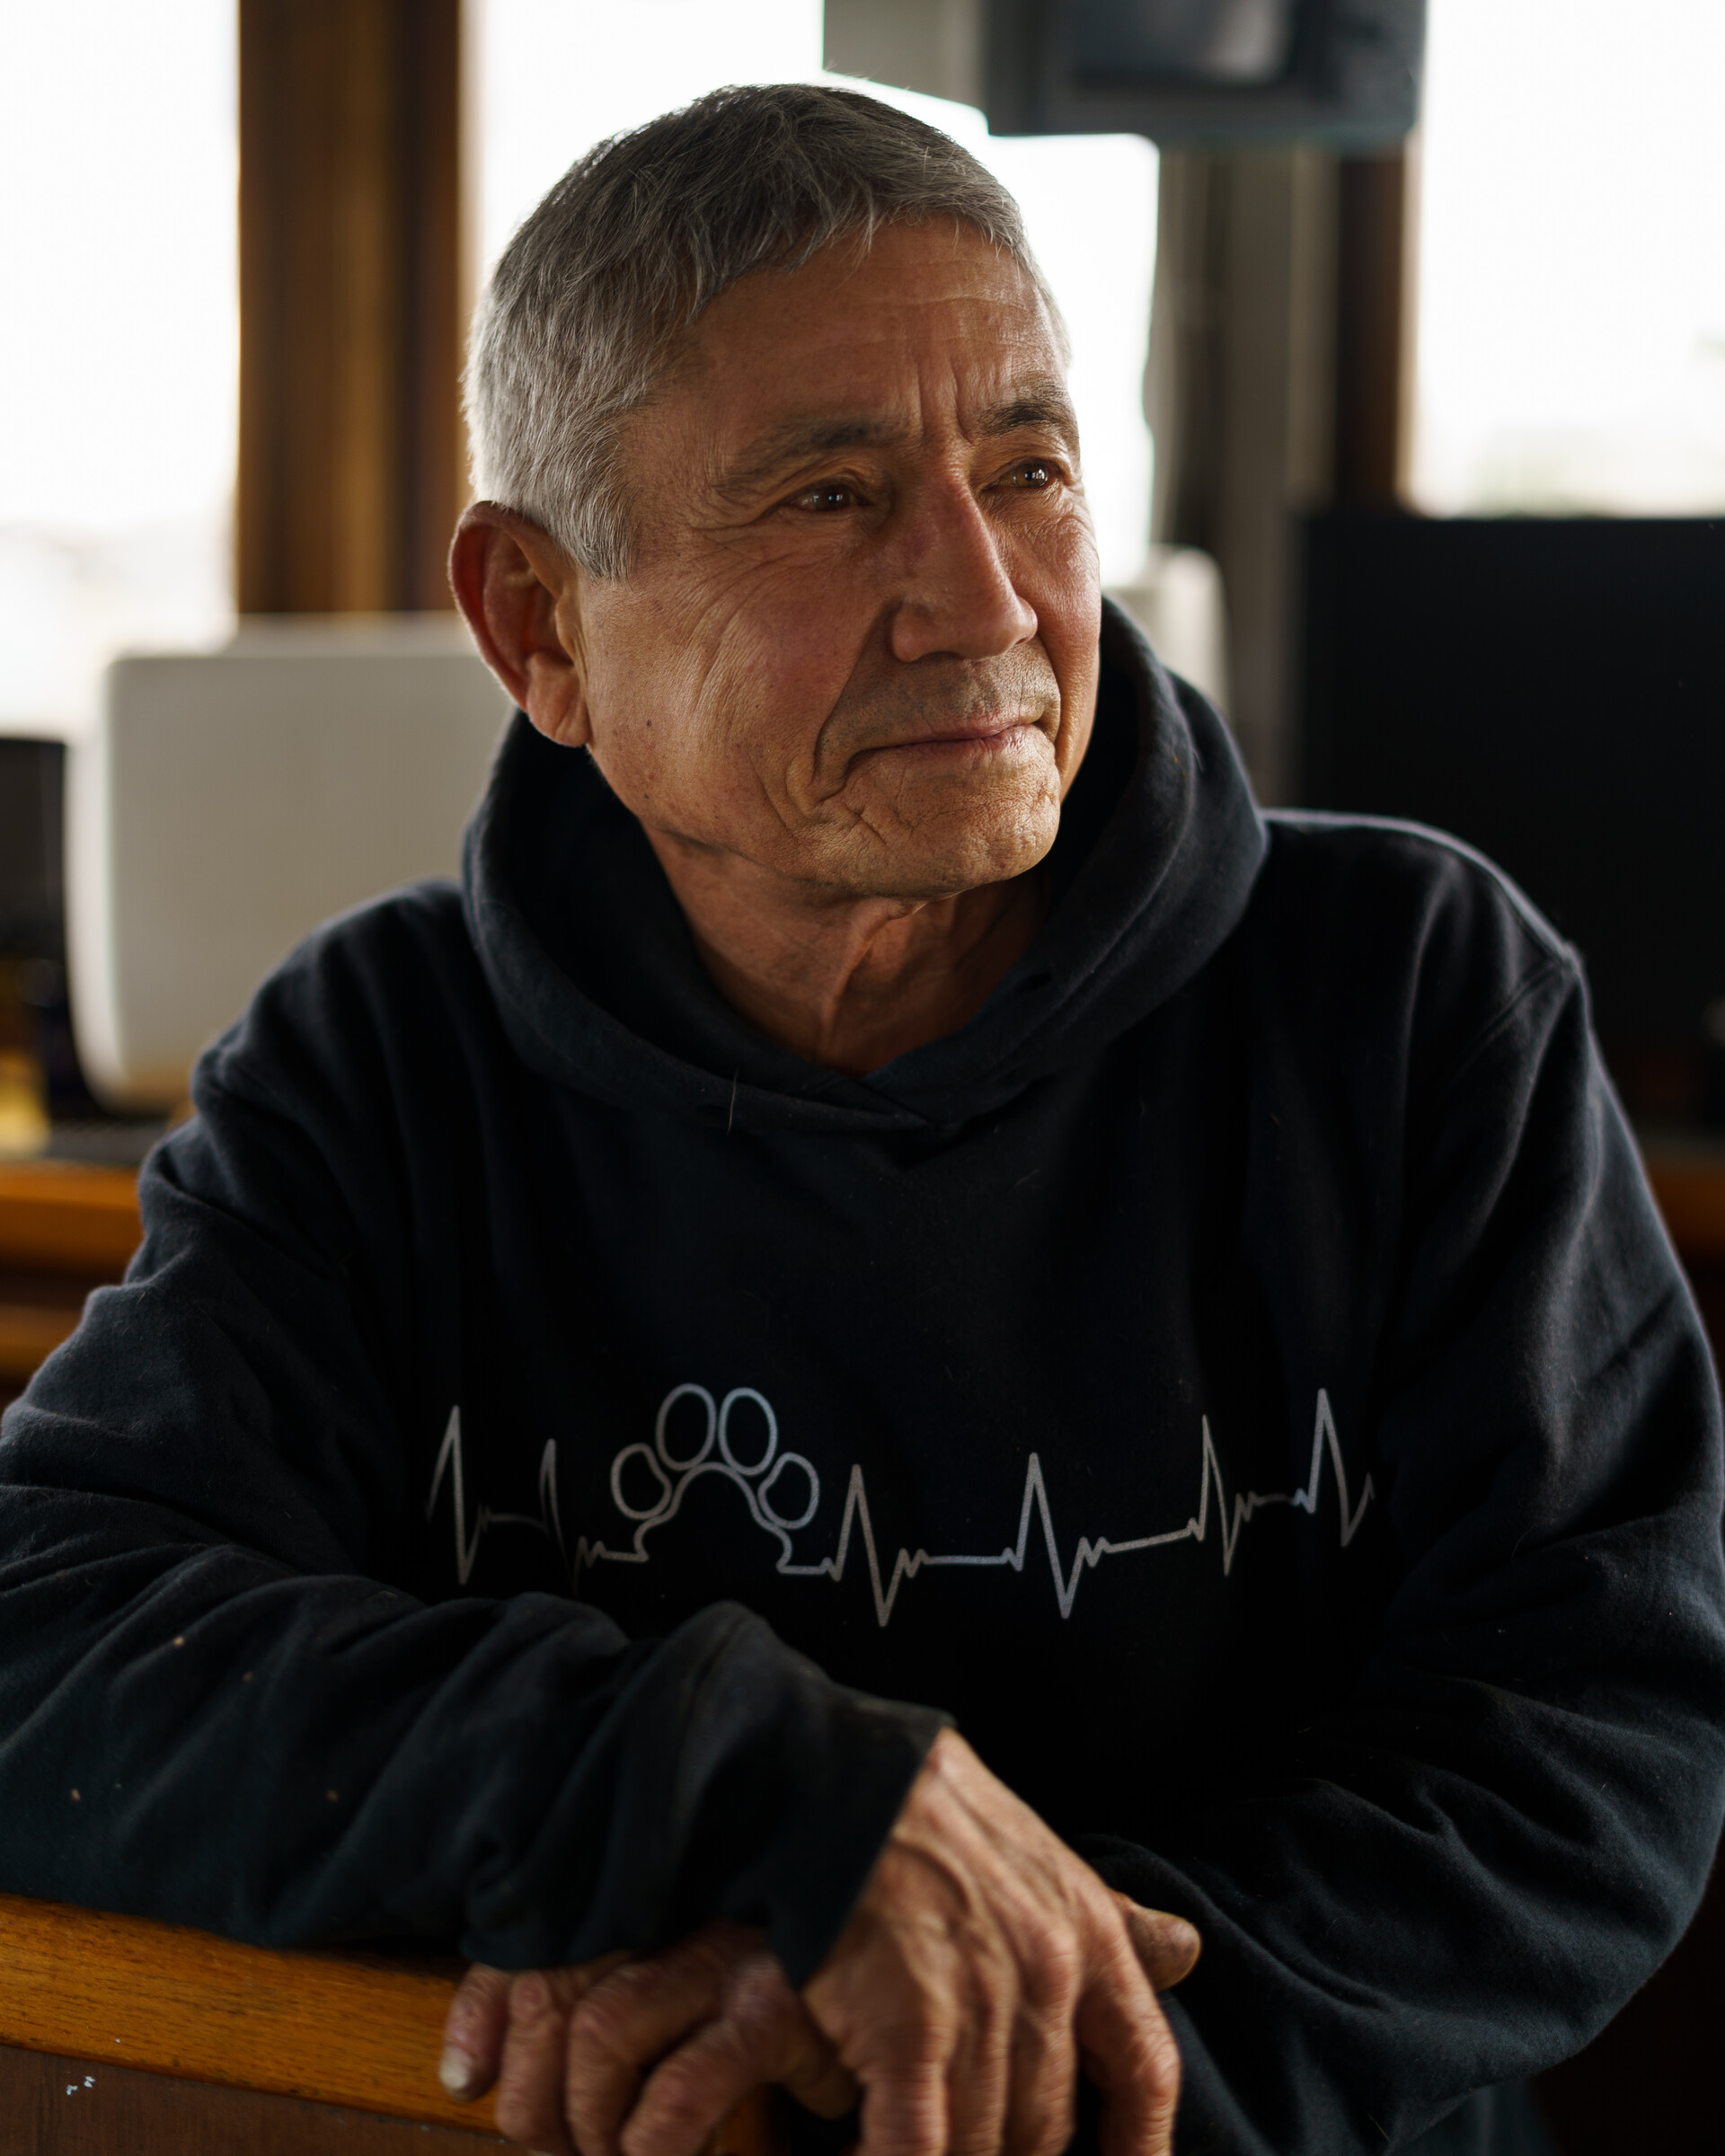 An older man who appears to be of both white and Asian ancestry, with close-cropped gray hair and a black hoodie pictured below-deck of a boat on a bright yet cloudy, glare-y day.